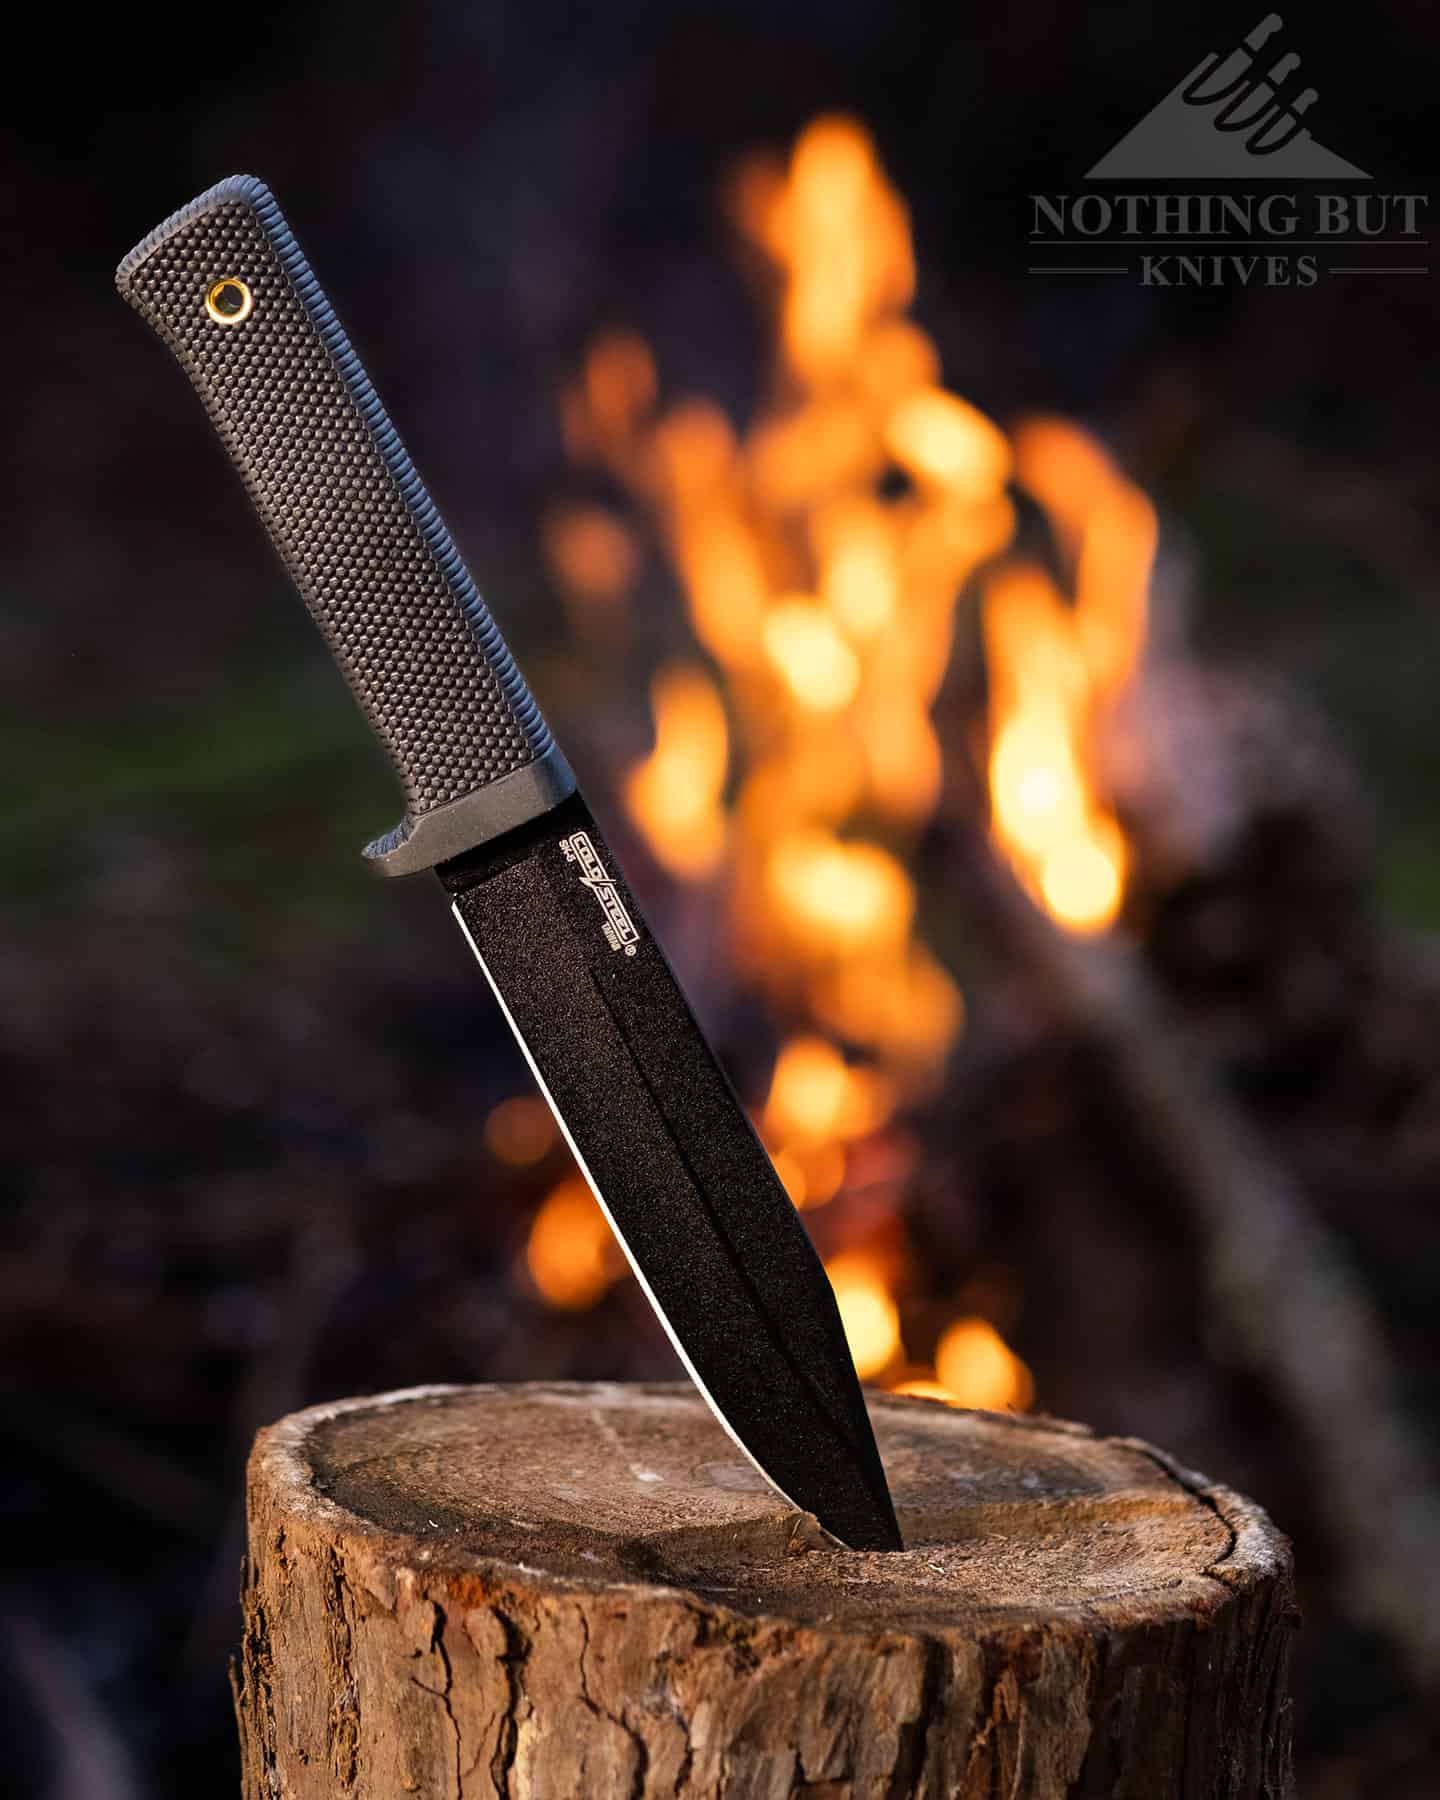 The Cold Steel SRK is one of the most popular budget survival knives on the market.